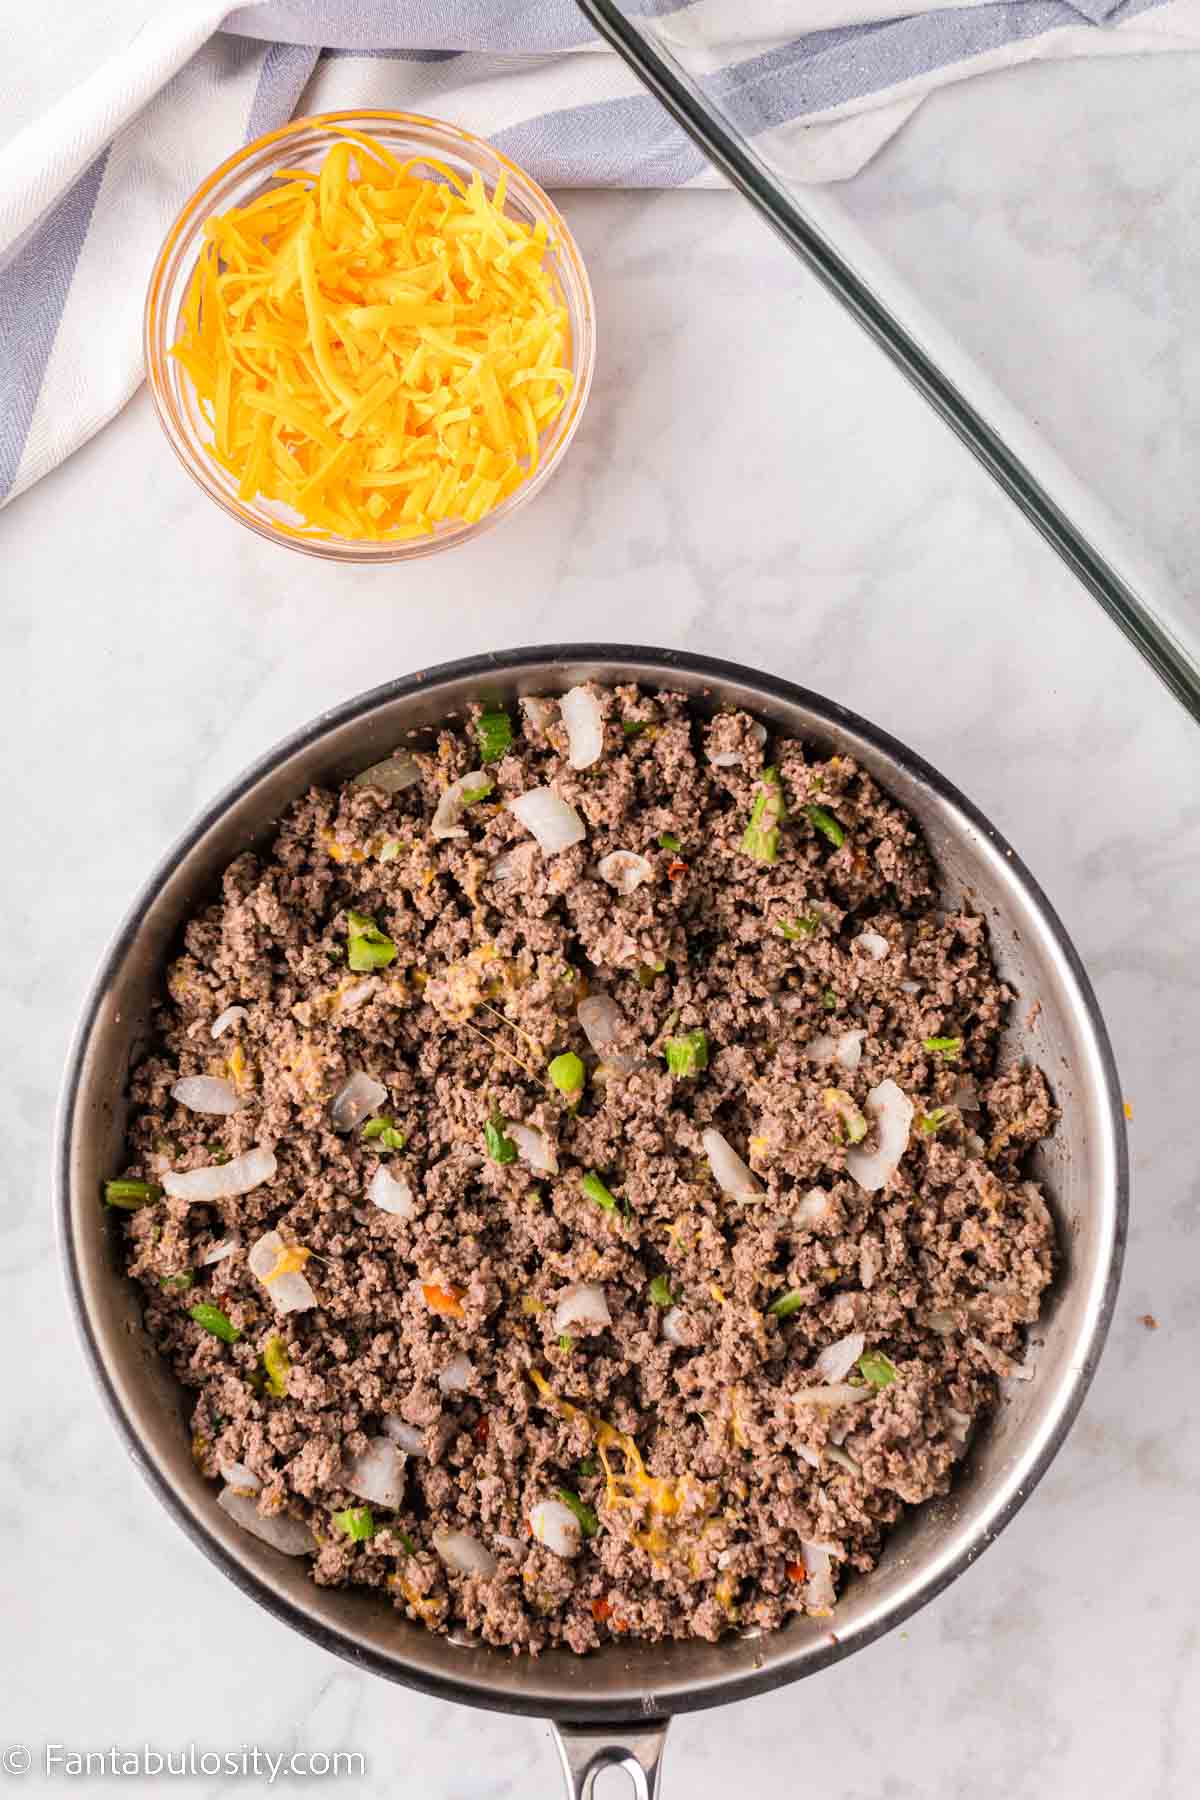 Cheese mixed in to the ground beef.